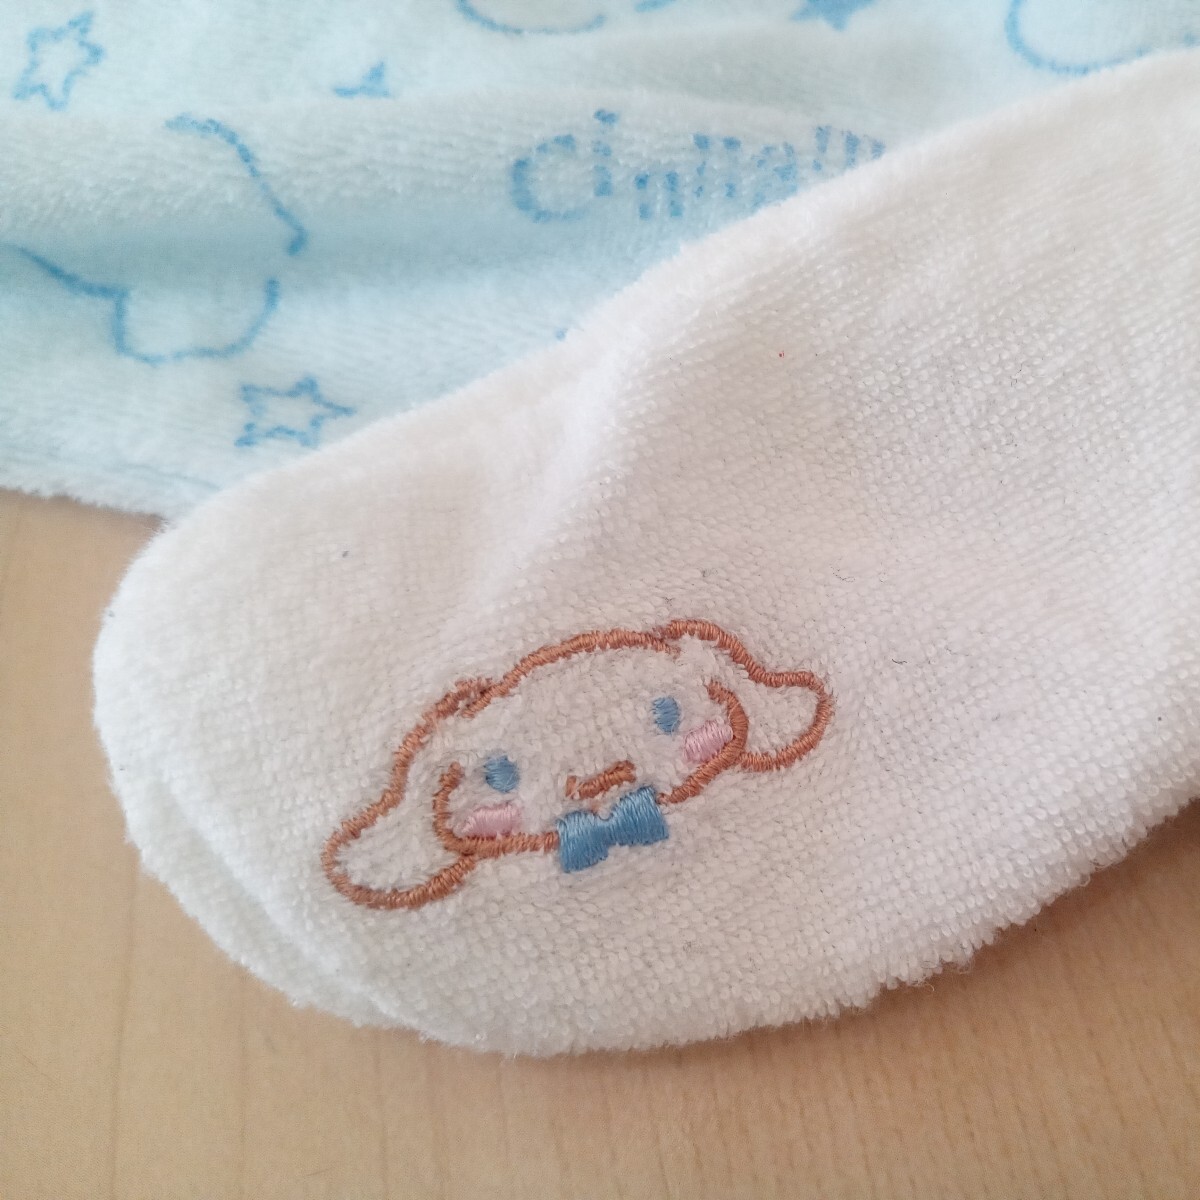  Sanrio sina Monroe ru water suction towel rear . bundle . rubber attaching pool. after use towel ground. hat USED* swim pool ..*